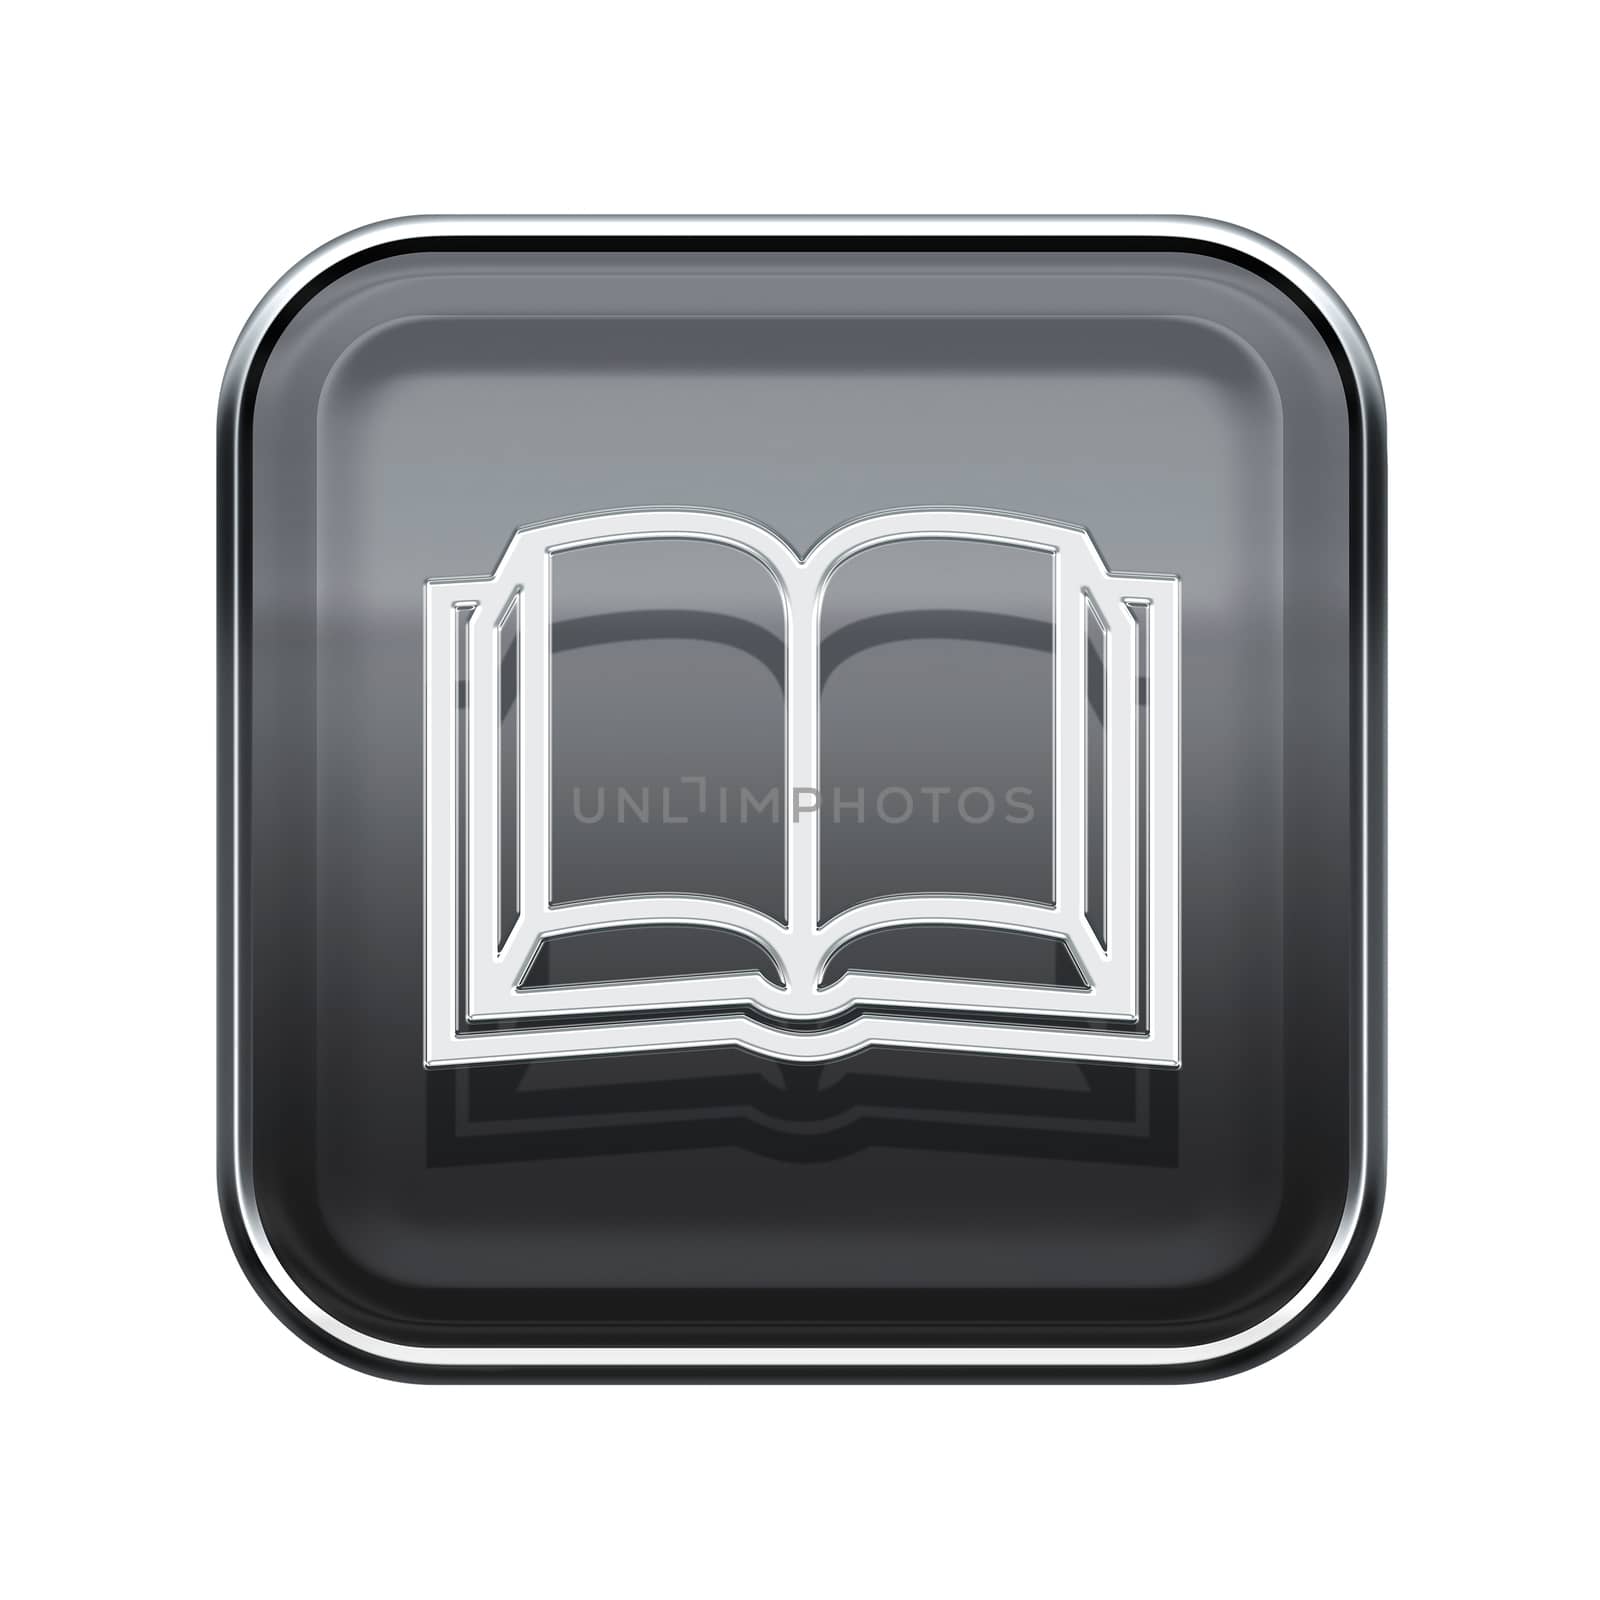 book icon glossy grey, isolated on white background